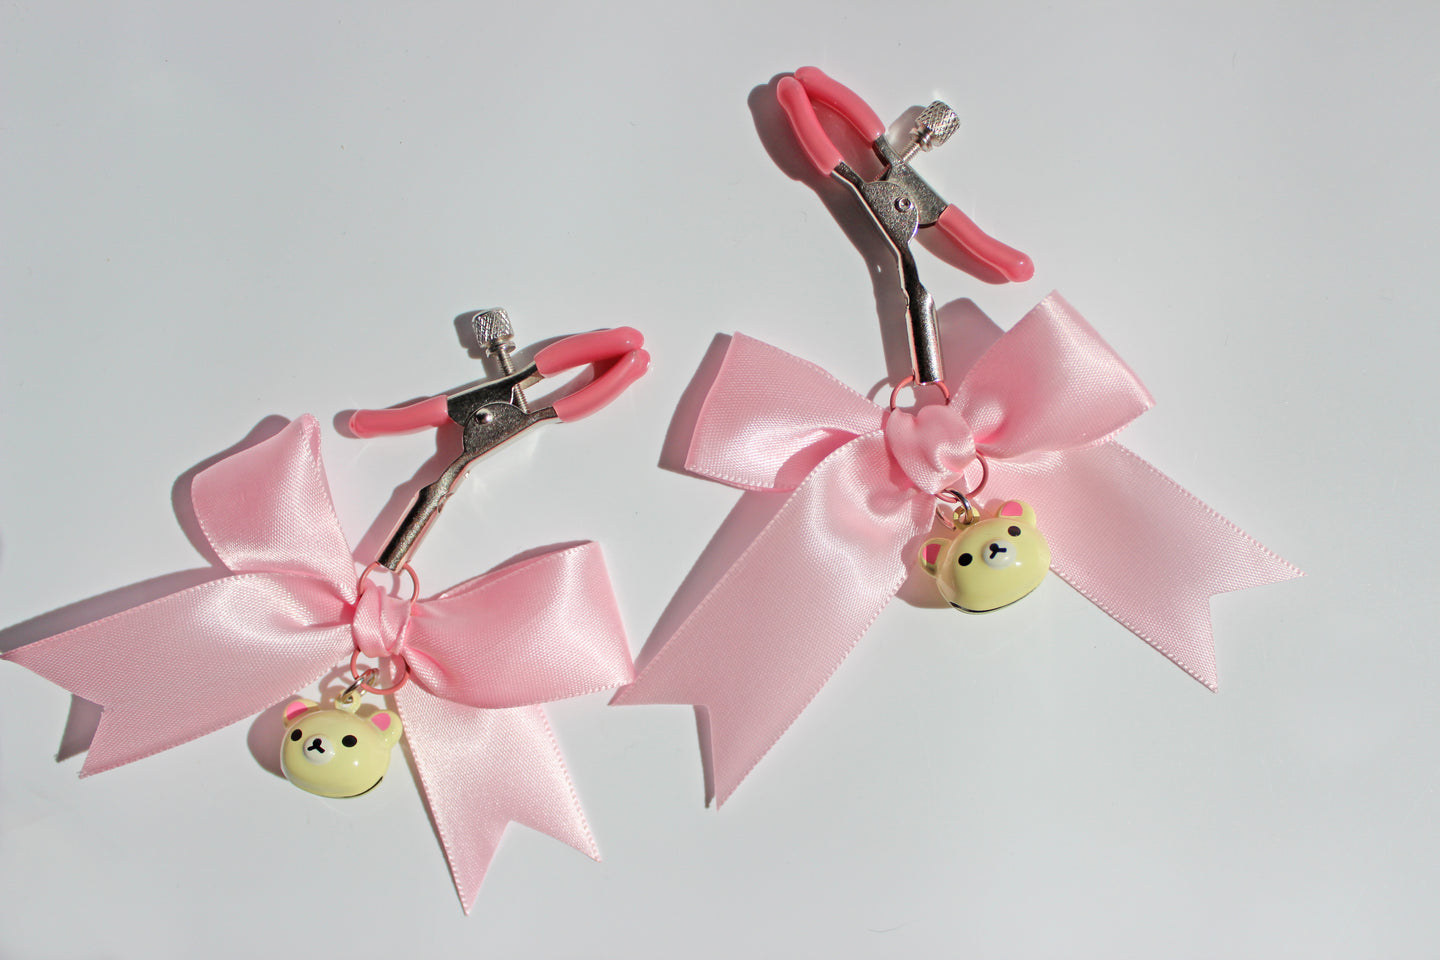 Silver nipple clamps with pink pvc caps and adjustable tension screw and pink bows and white bear heads hanging off the clamps on a white background.